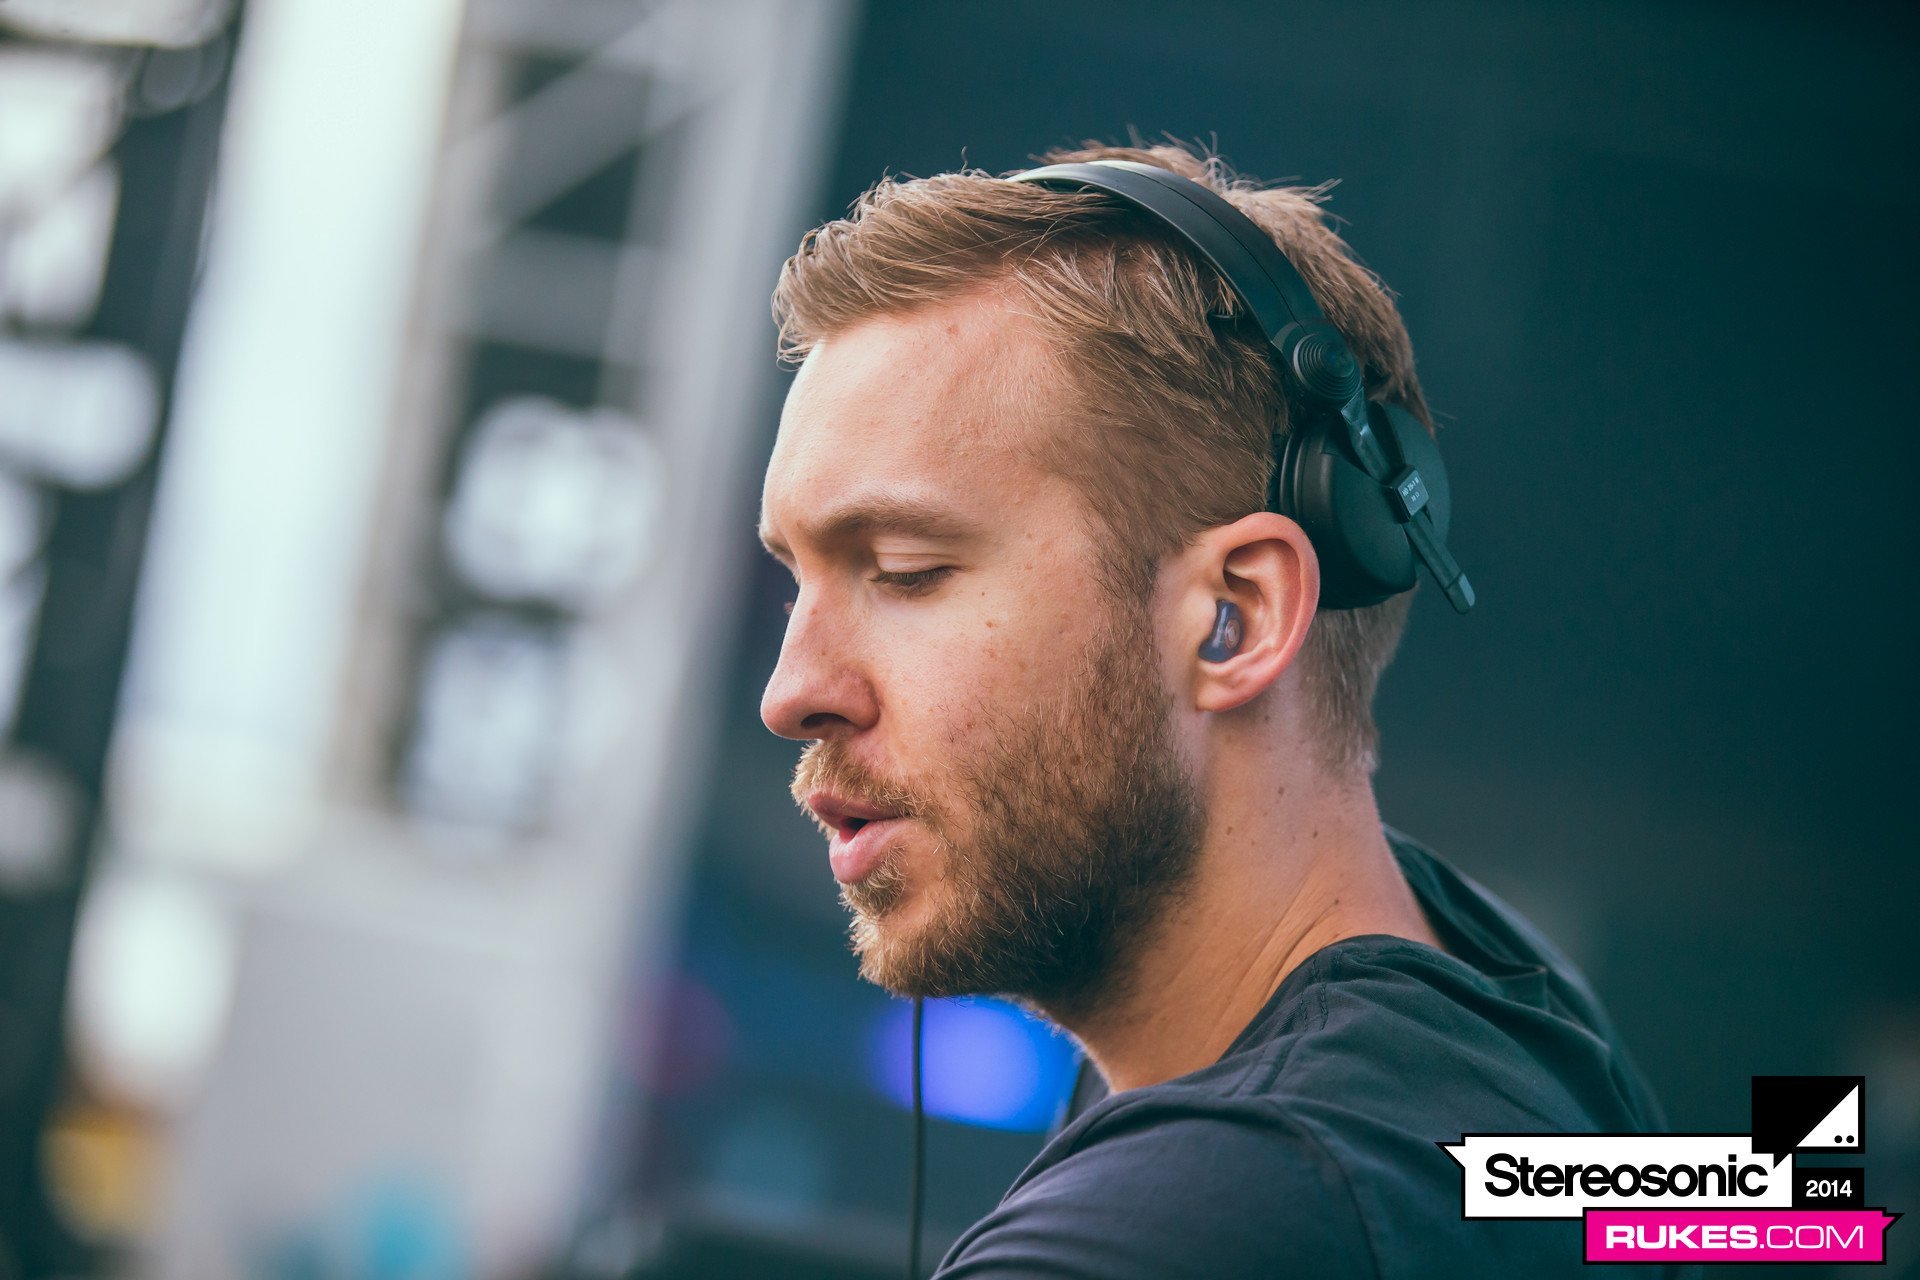 MUST LISTEN: Calvin Harris Just Dropped A Brand New Valentine’s Day-Themed EP